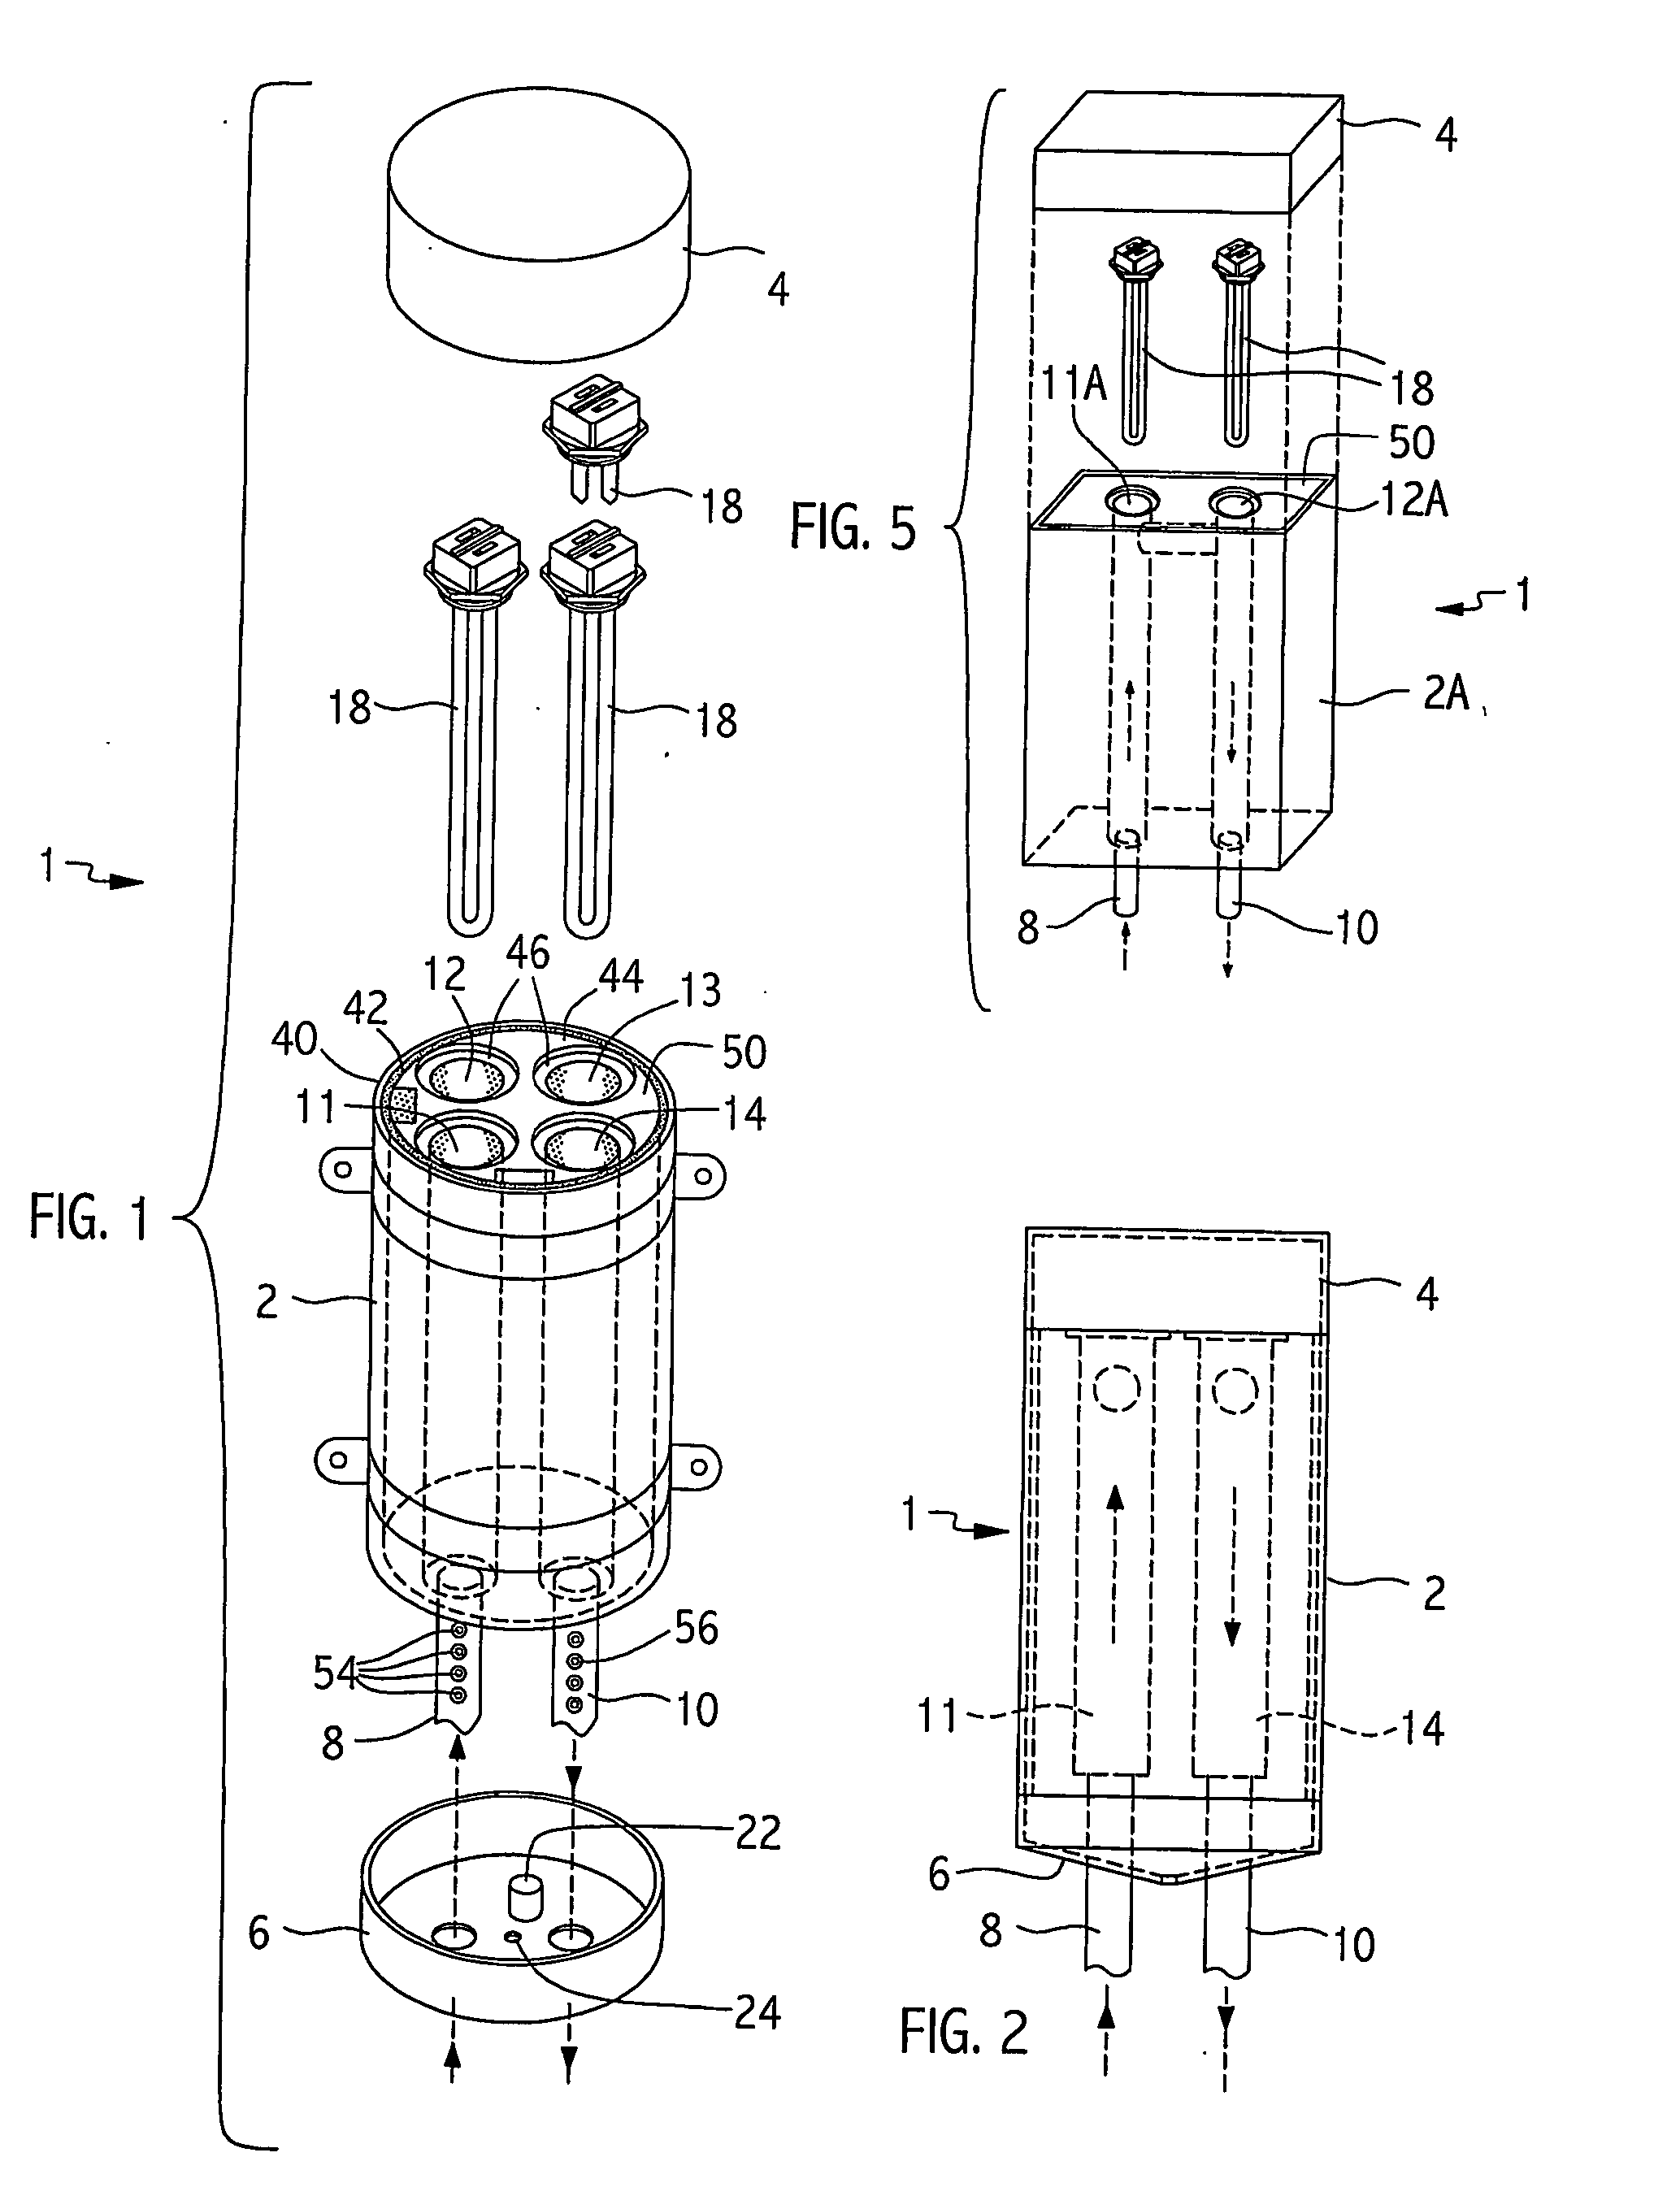 Pre-heating contiguous in-line water heater